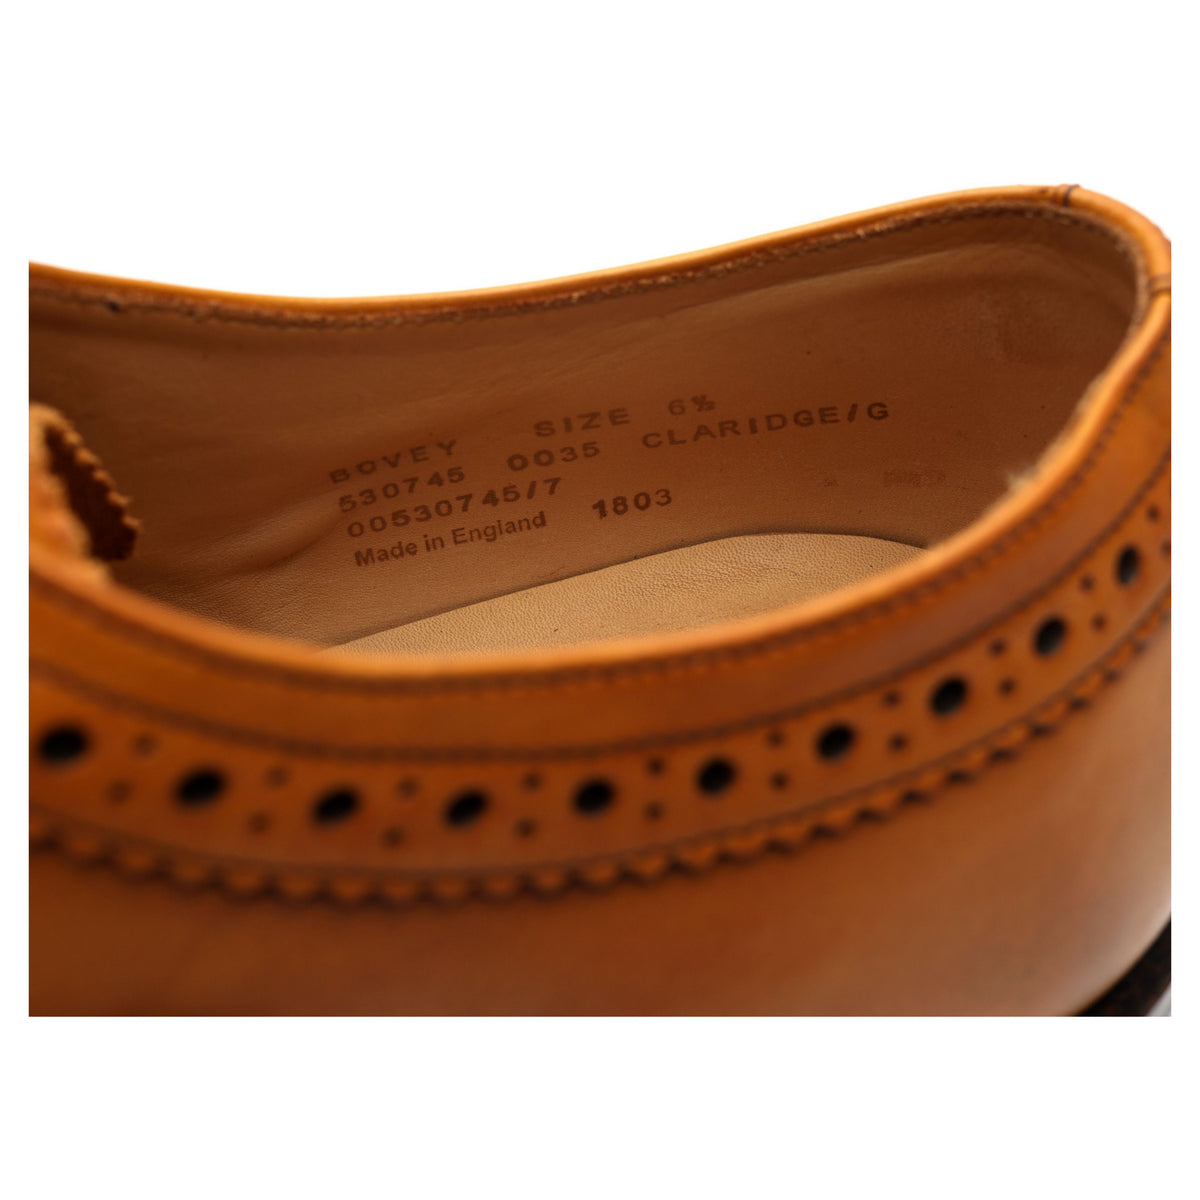 &#39;Bovey&#39; Tan Brown Leather Brogues UK 6.5 G